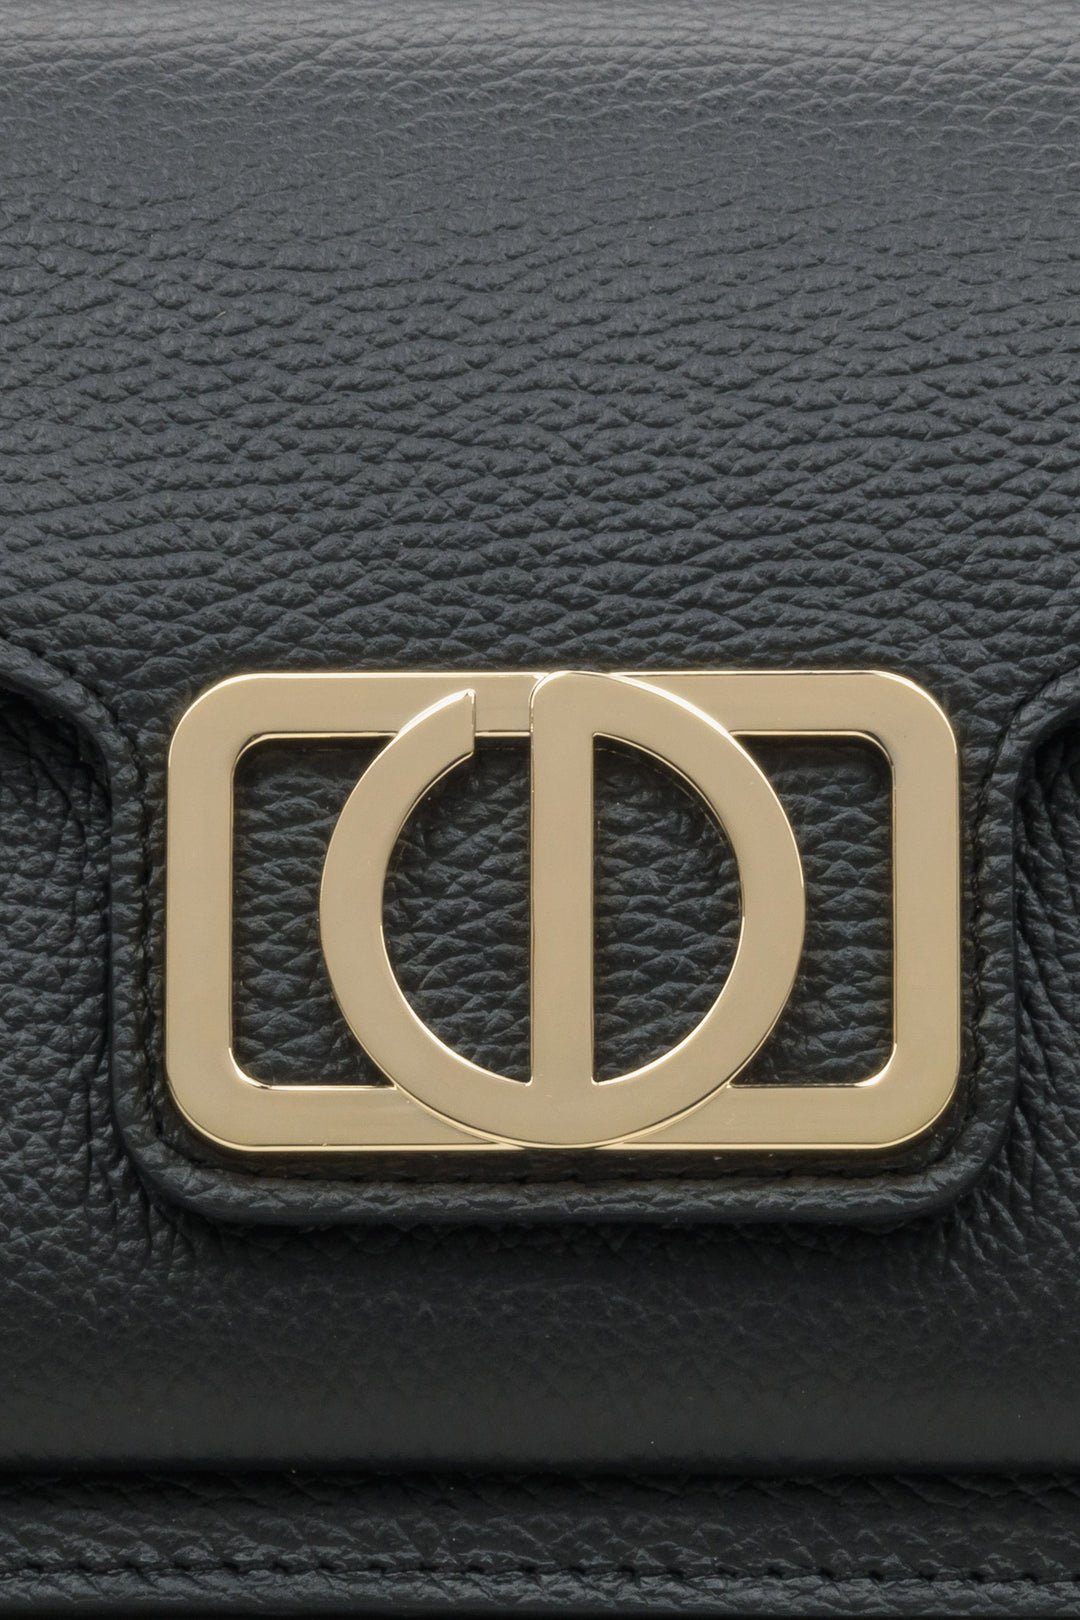 Women's black shoulder bag made of Italian genuine leather by Estro - close-up on the details.